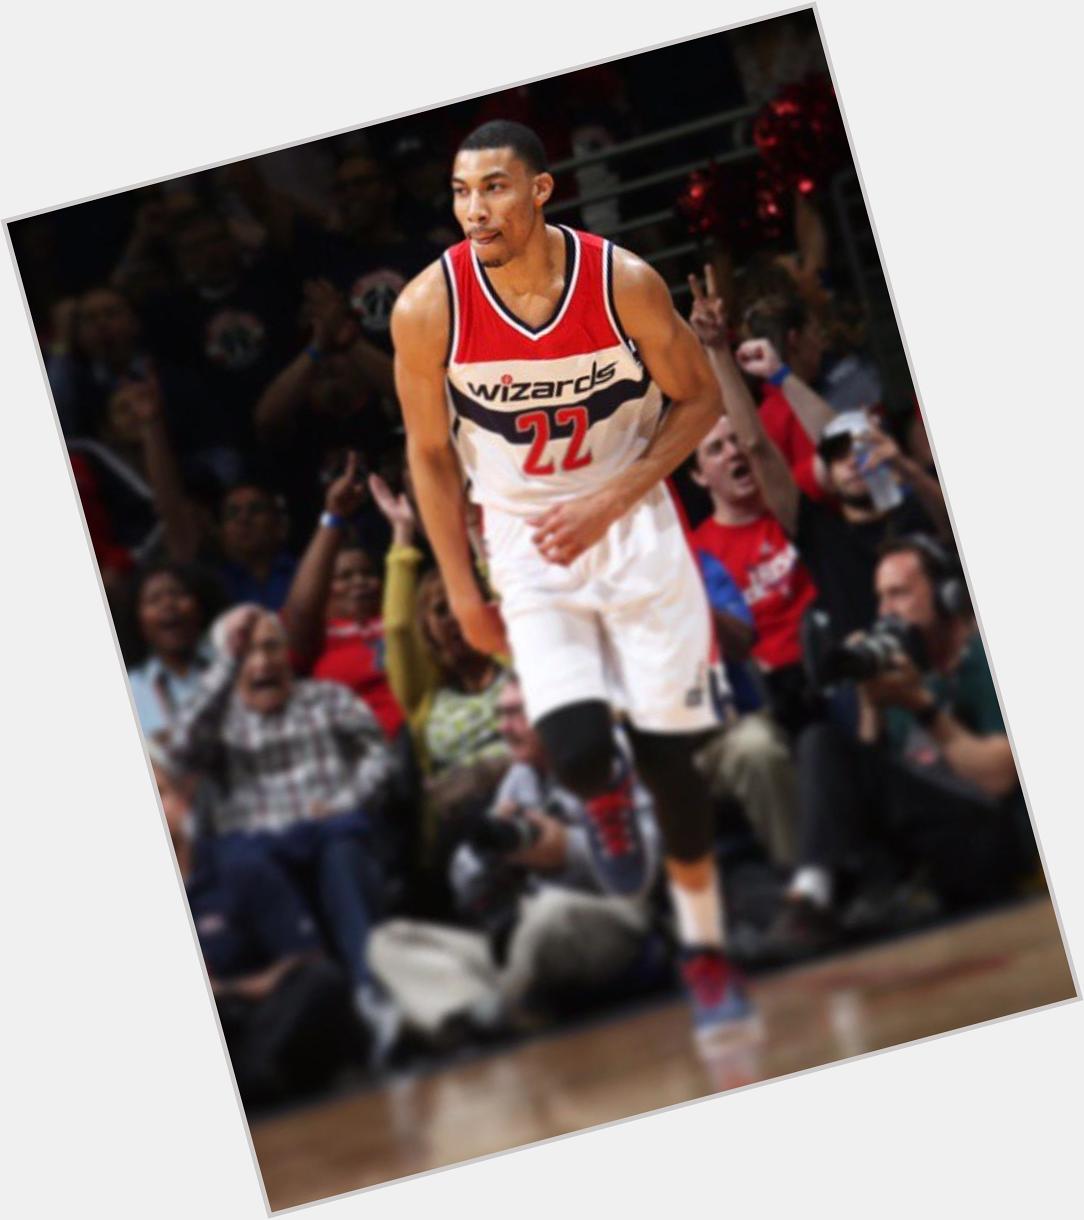 Happy birthday to Otto Porter. He turned his jersey number today, 22!  